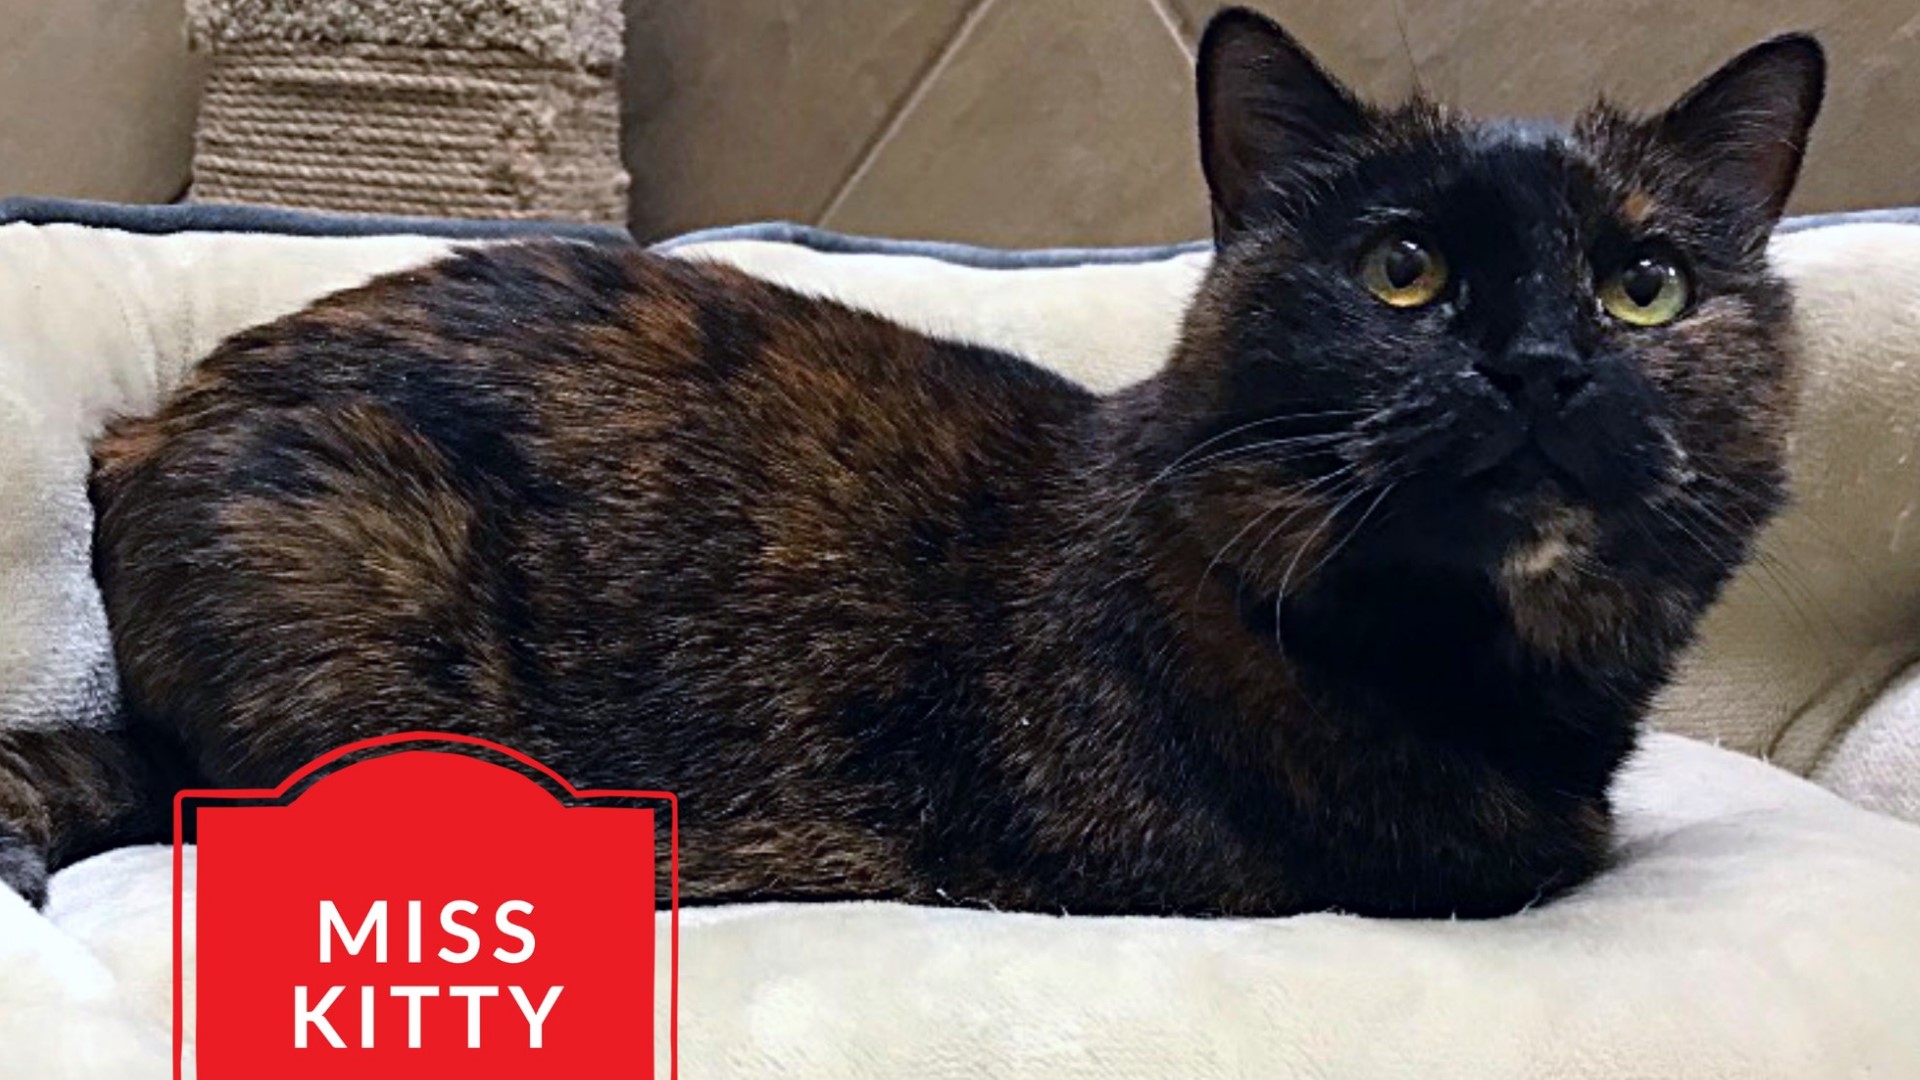 Miss Kitty is a 10-year-old tortoiseshell cat.